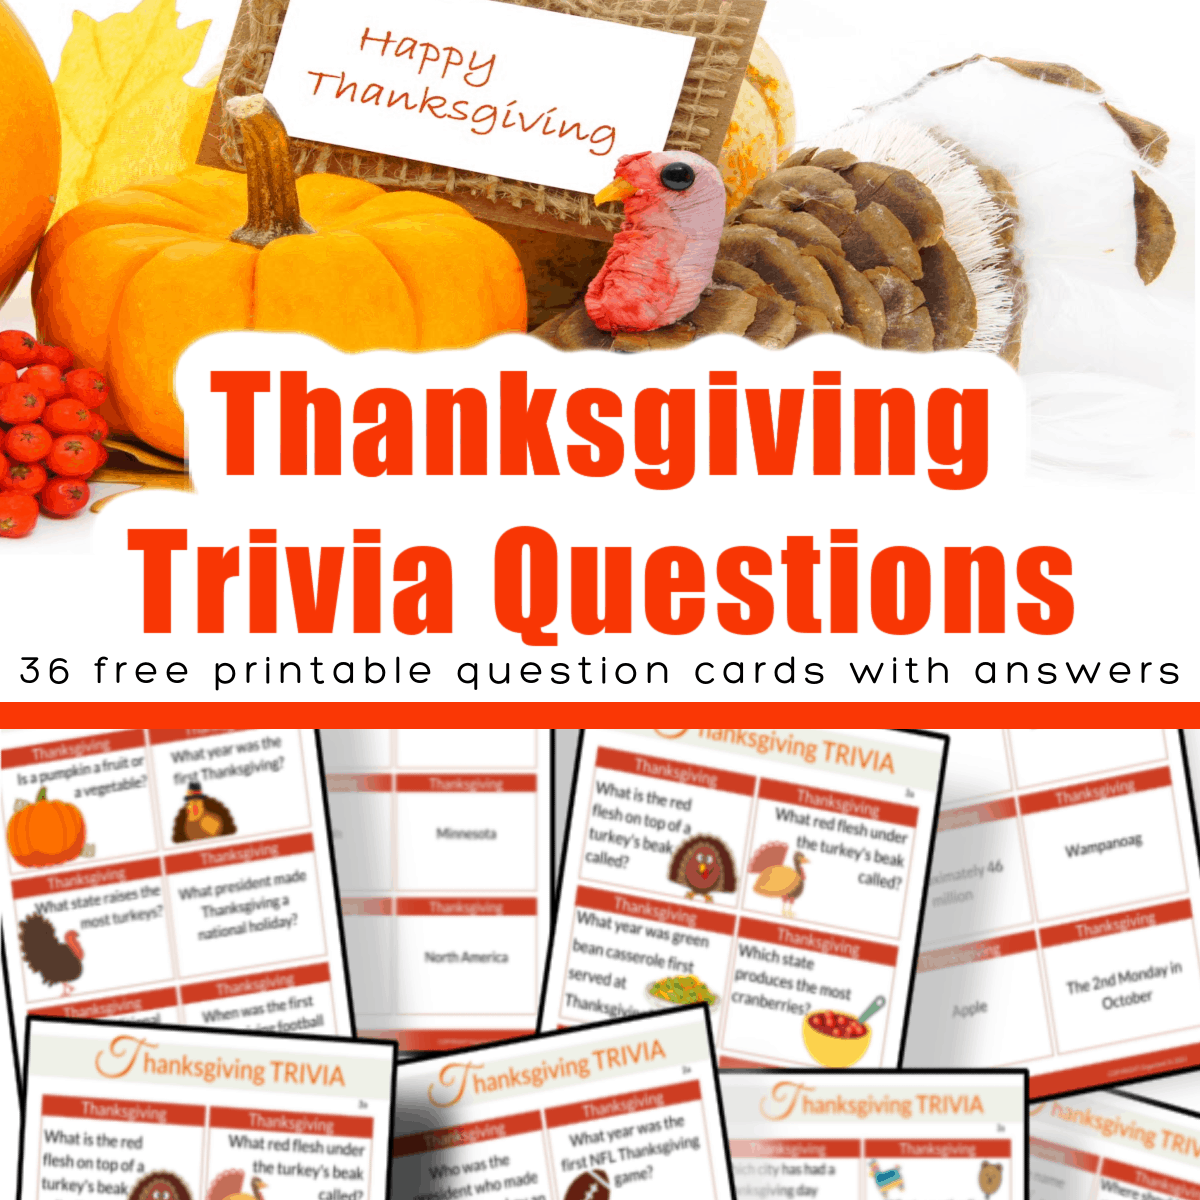 top image - pumpkin and turkey with happy thanksgiving sign, bottom image 8 Thanksgiving Trivia question card sheets